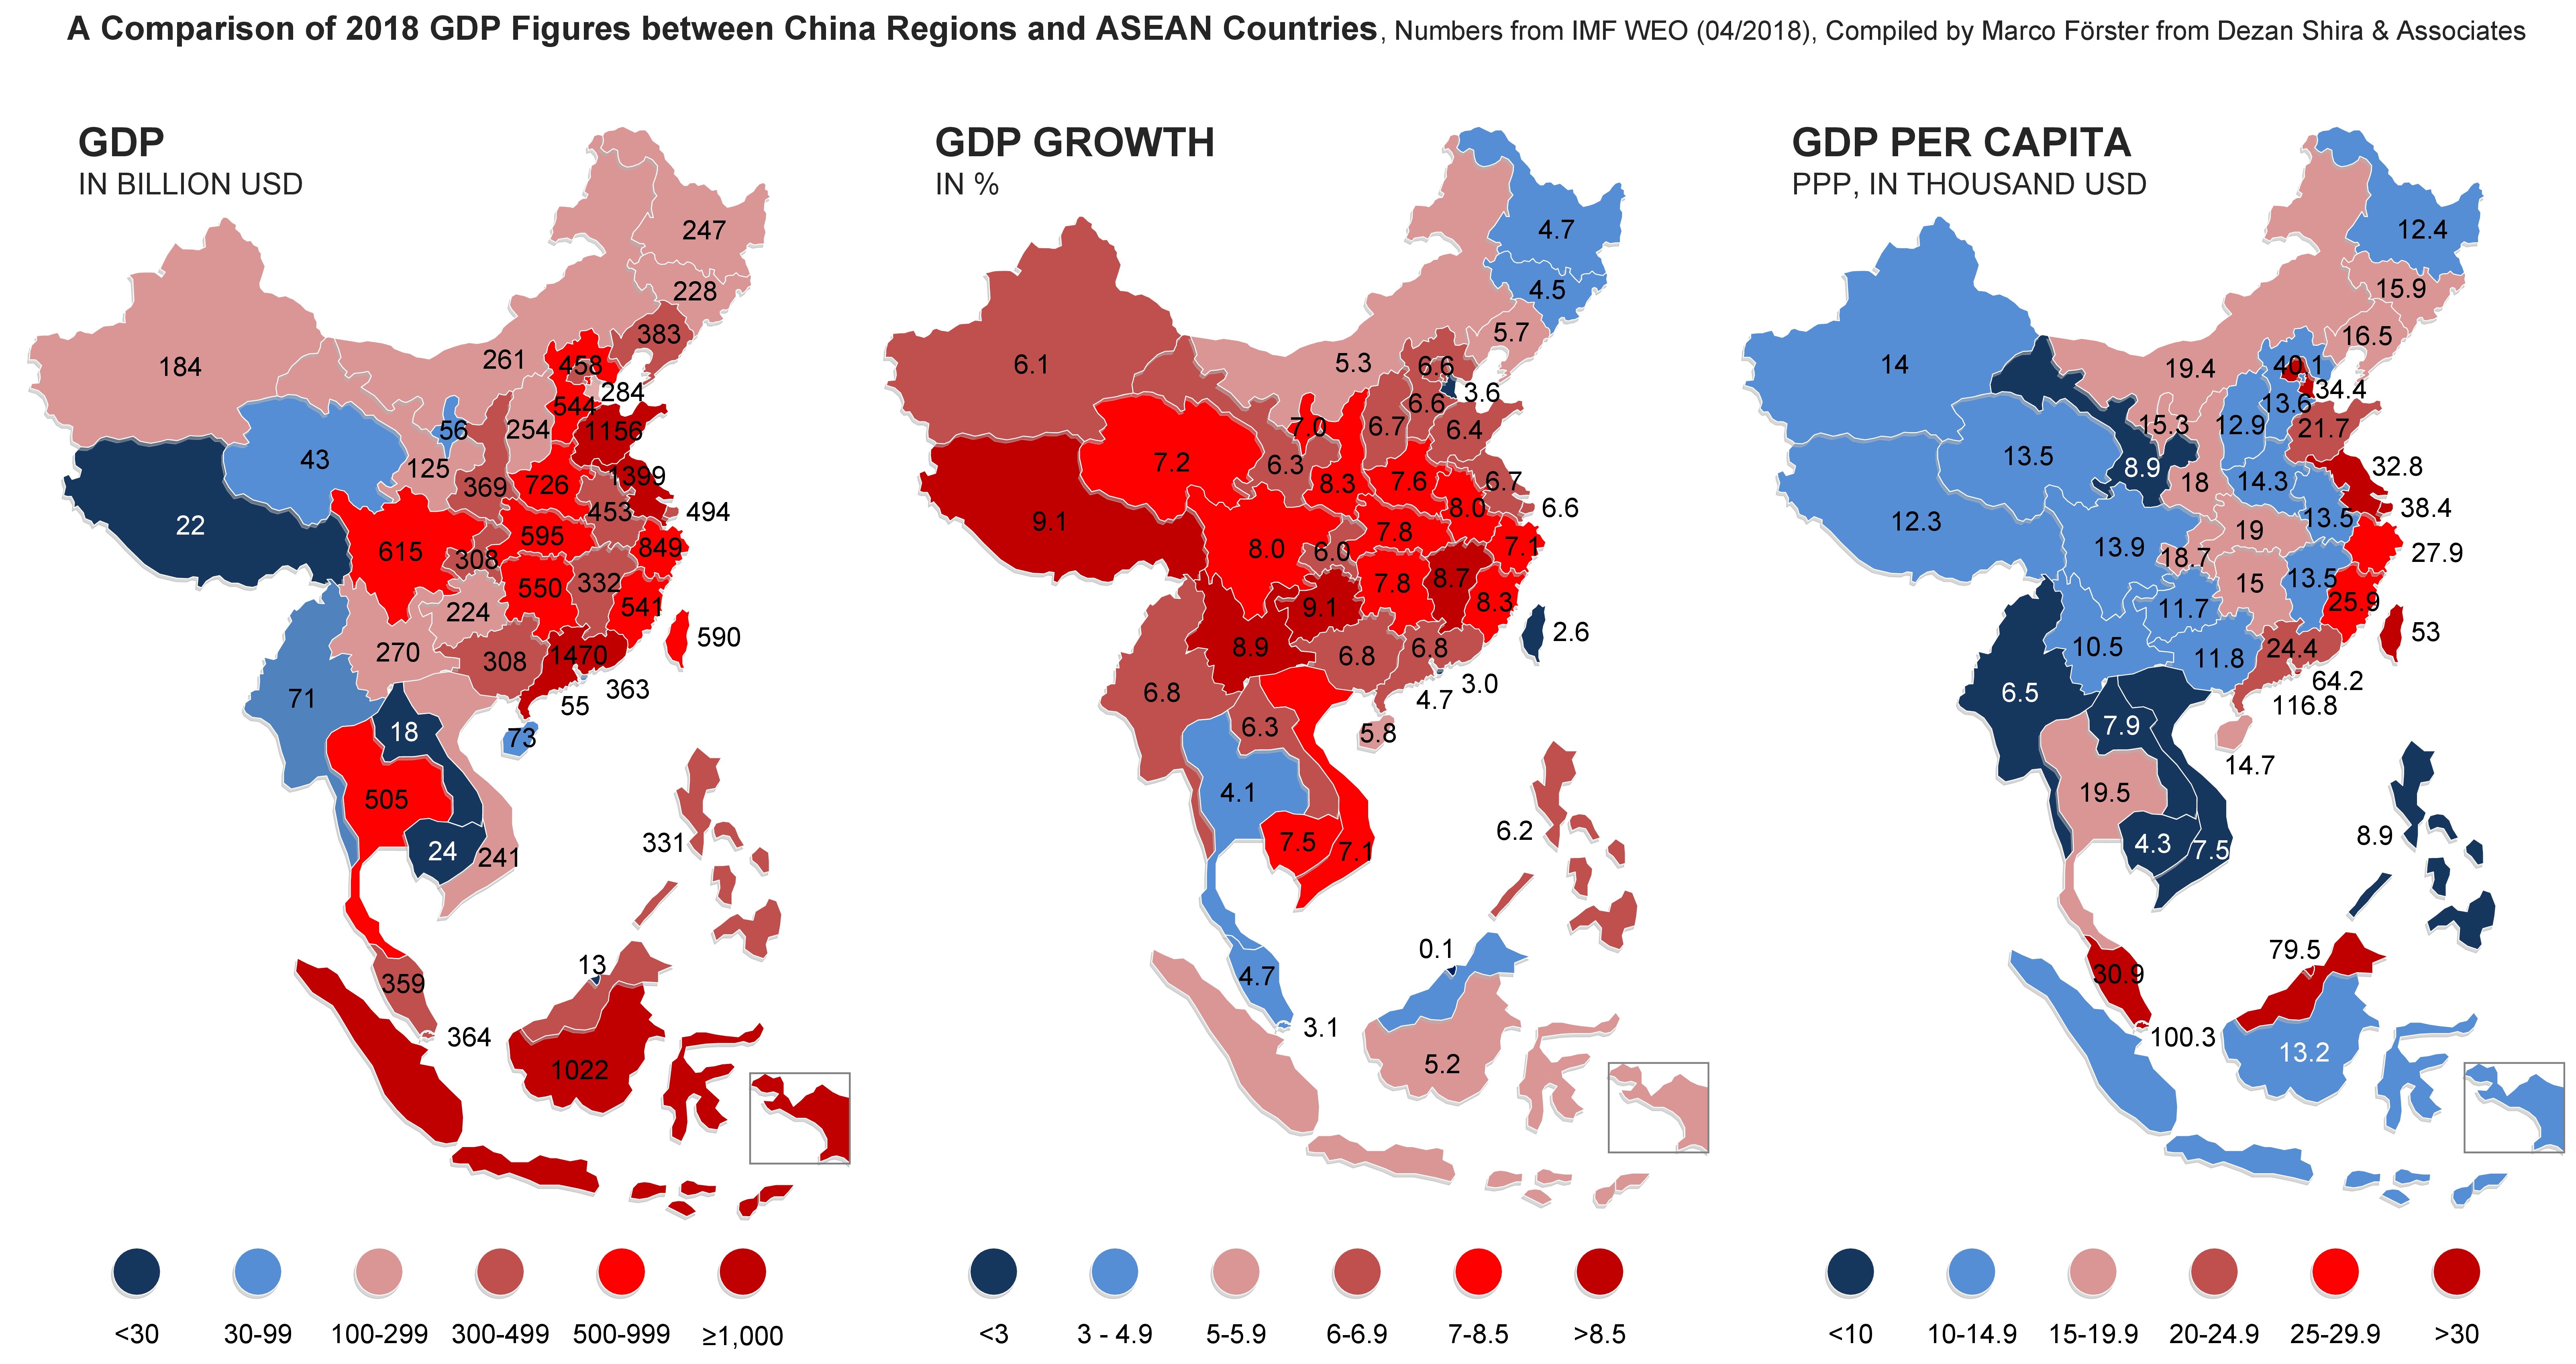 A New Perspective How Do Asean Economies Stand Against China Regions